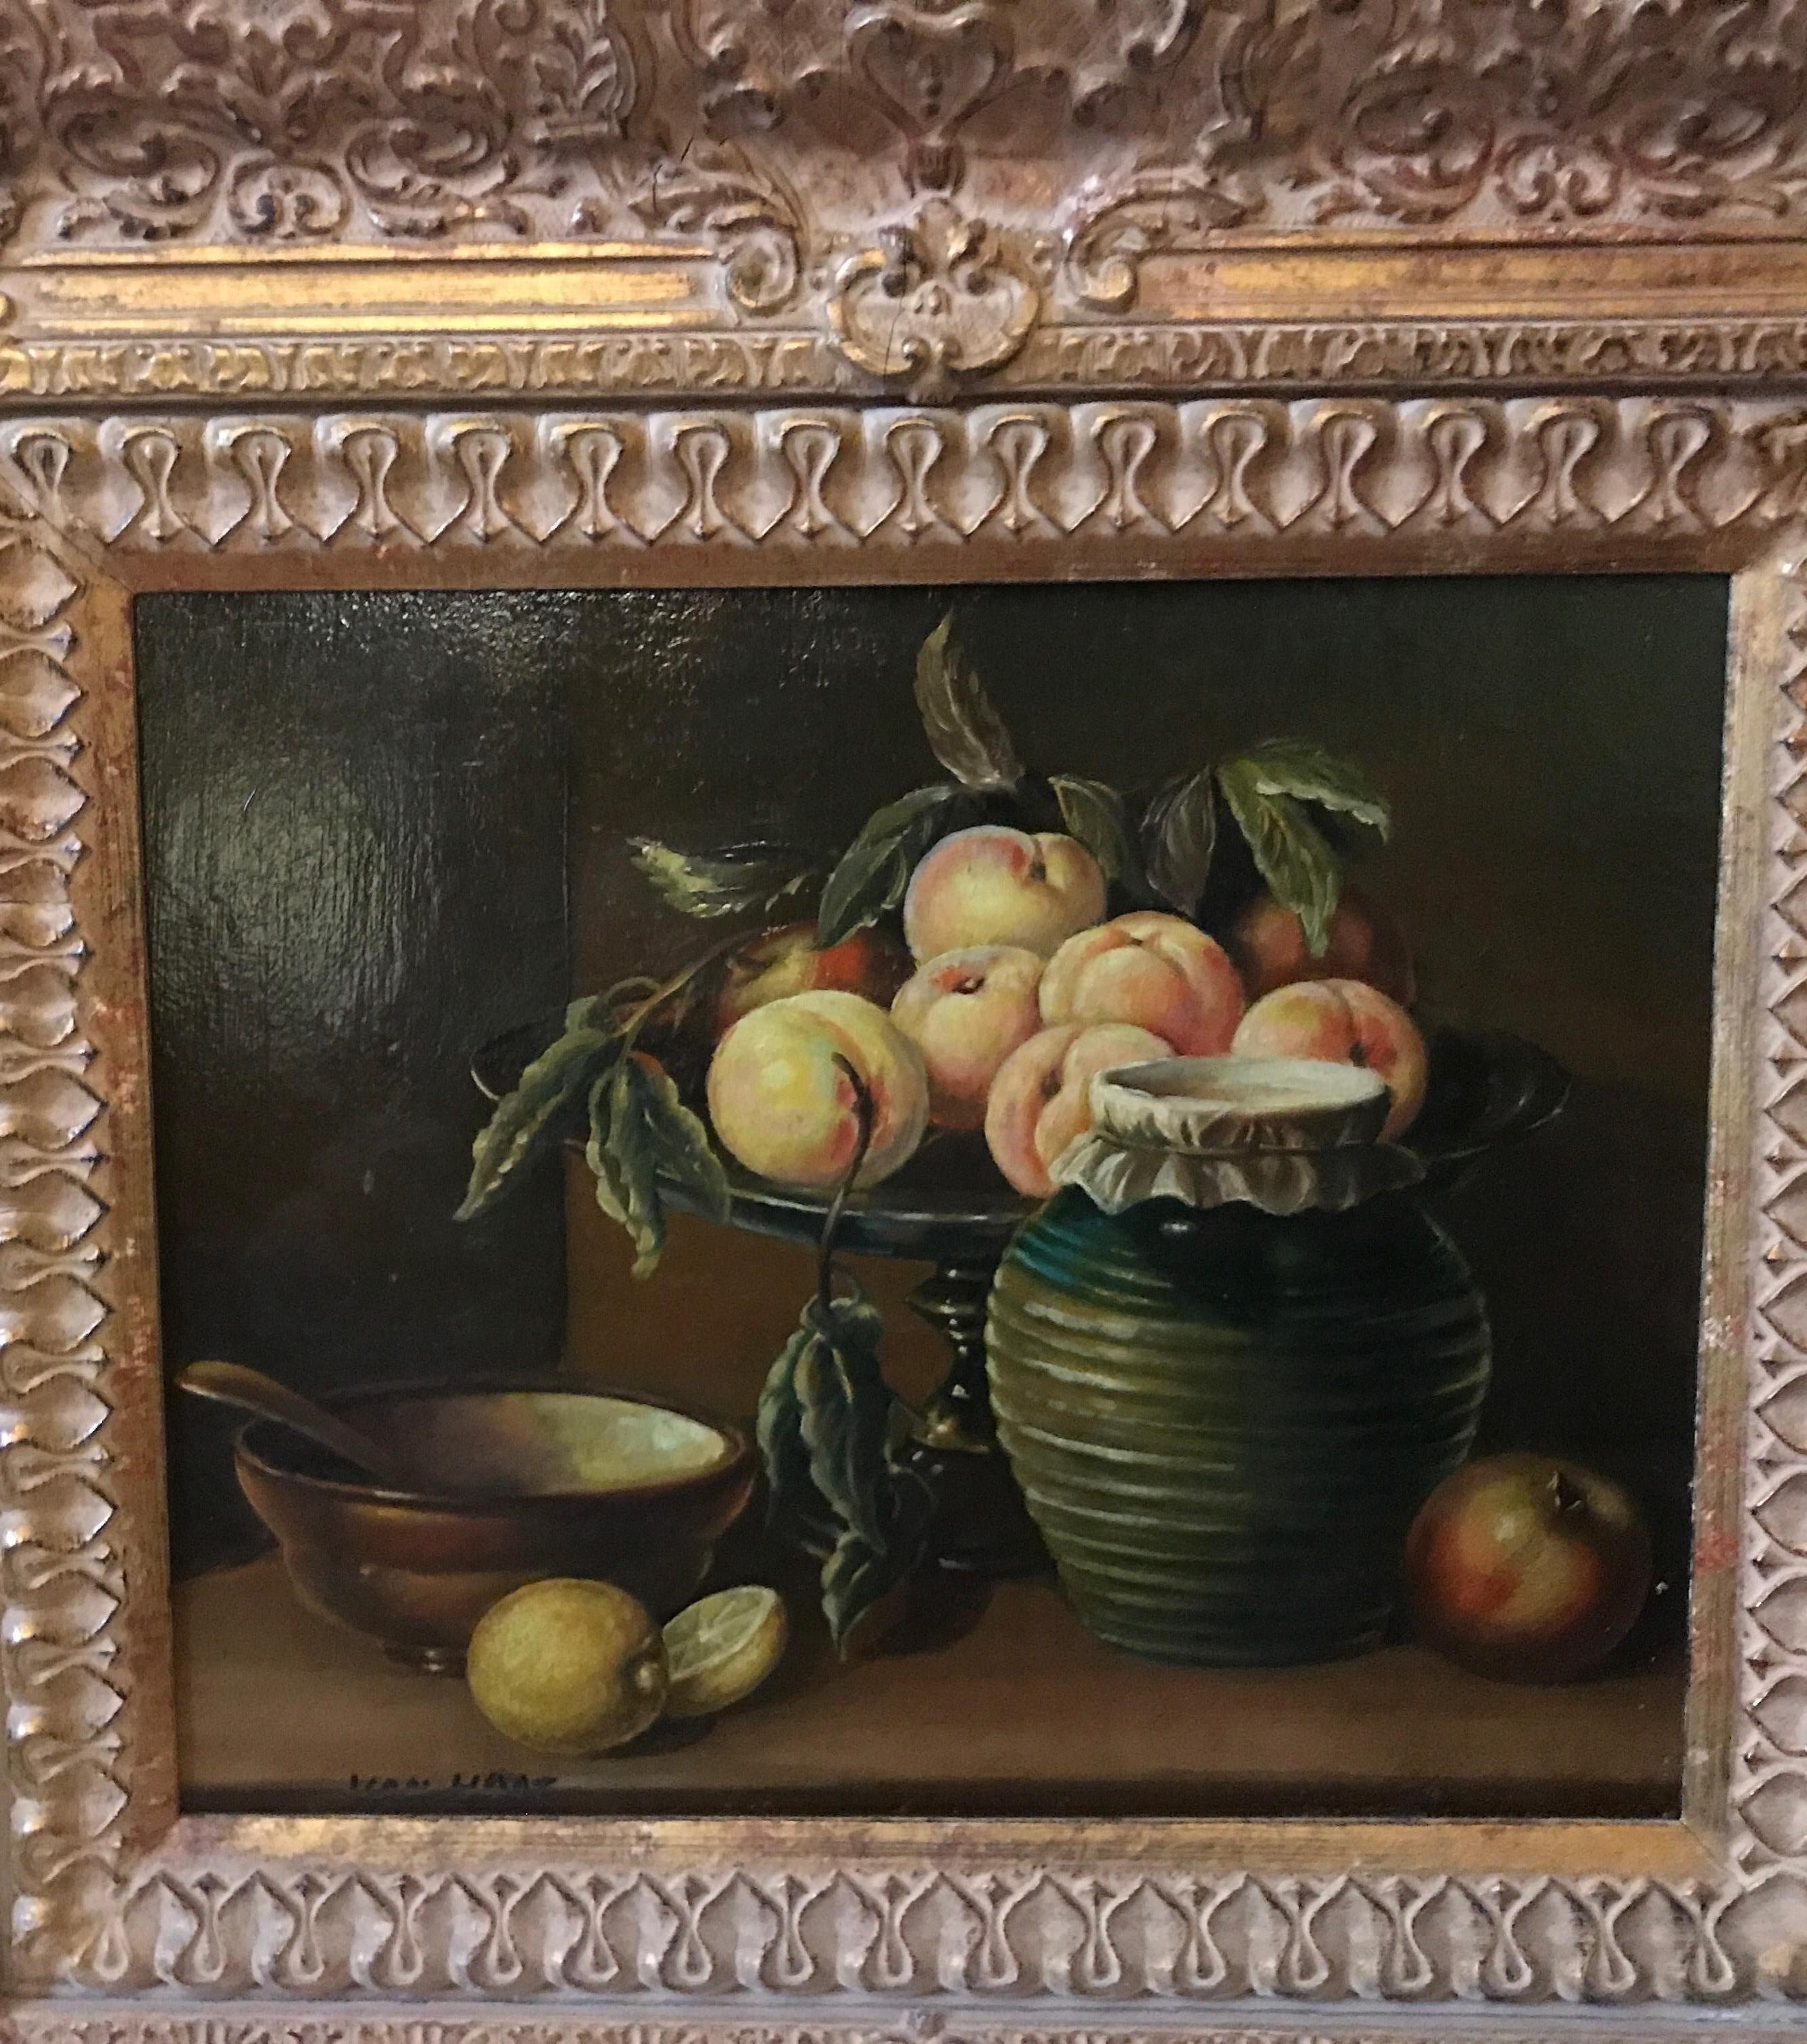 Oil painting on panel in gilt wood frame of fruit with bowls and jar, signed Van Haas in lower left corner. Probably Herminia Van Der Haas (1843-1921). Framed 18 wide, 16 high, unframed 10.5 wide, 8.5 high.